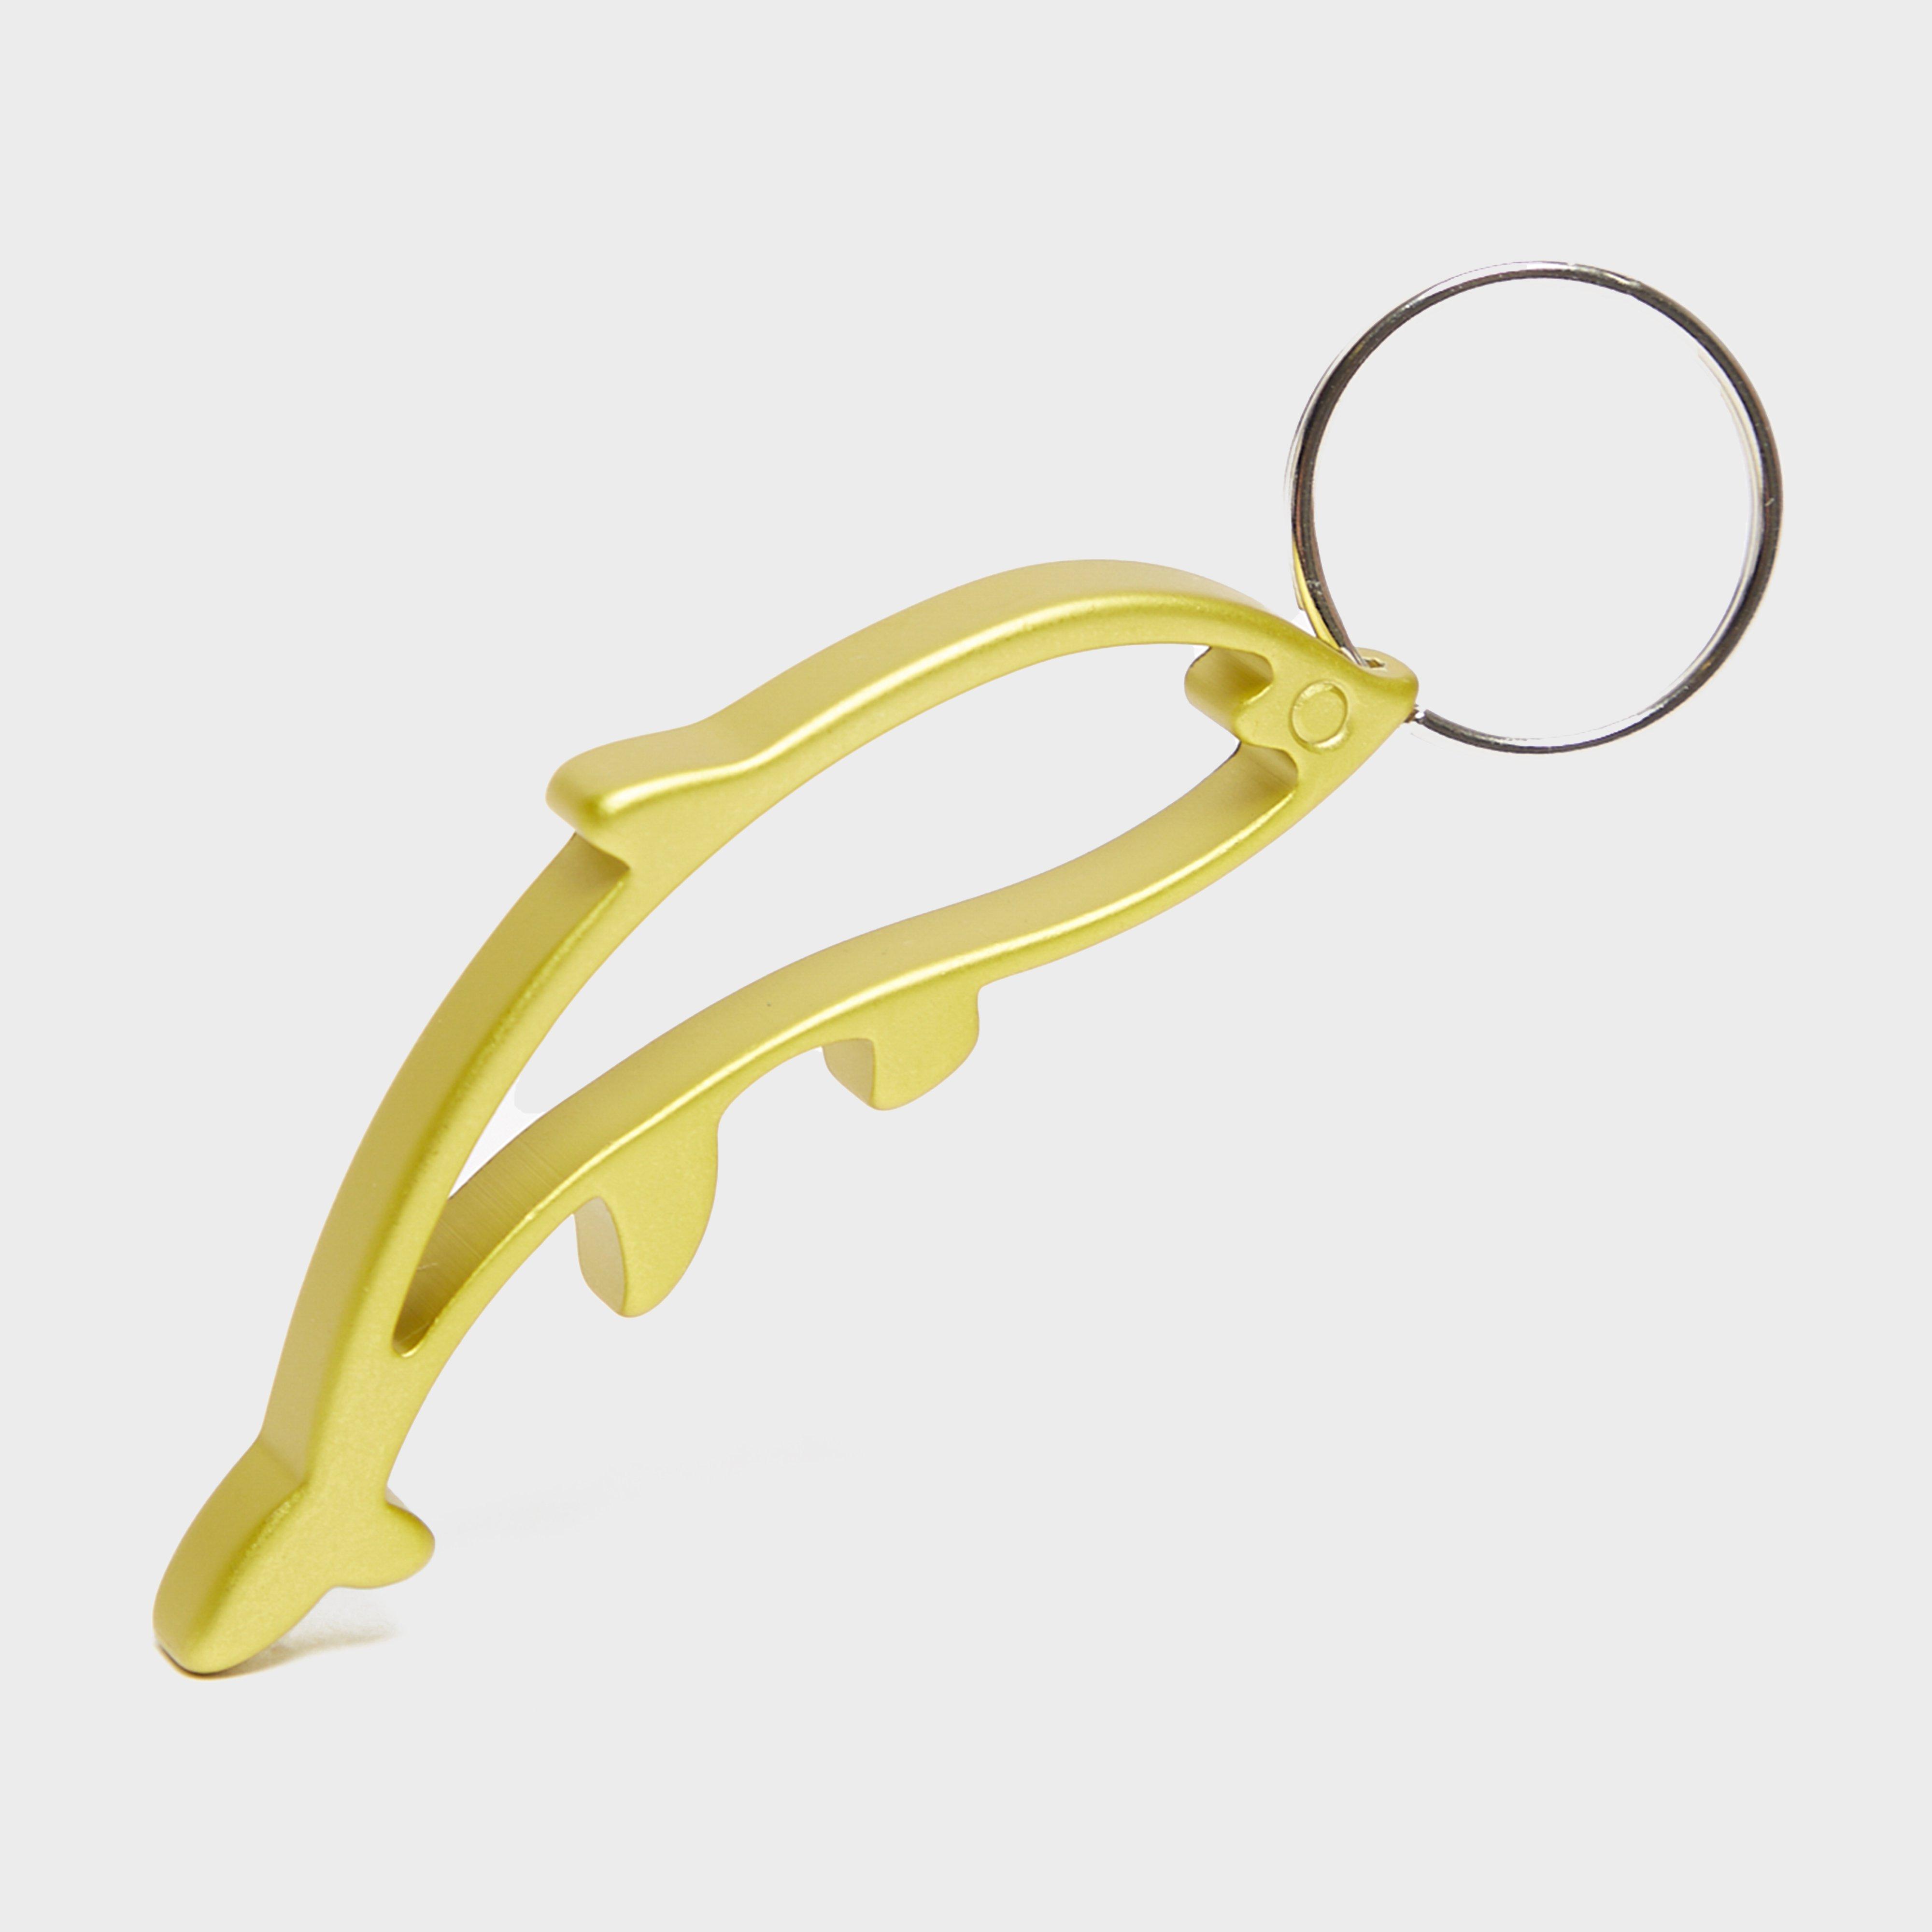 Photos - Other goods for tourism Eurohike Dolphin Keyring Bottle Opener, Yellow 